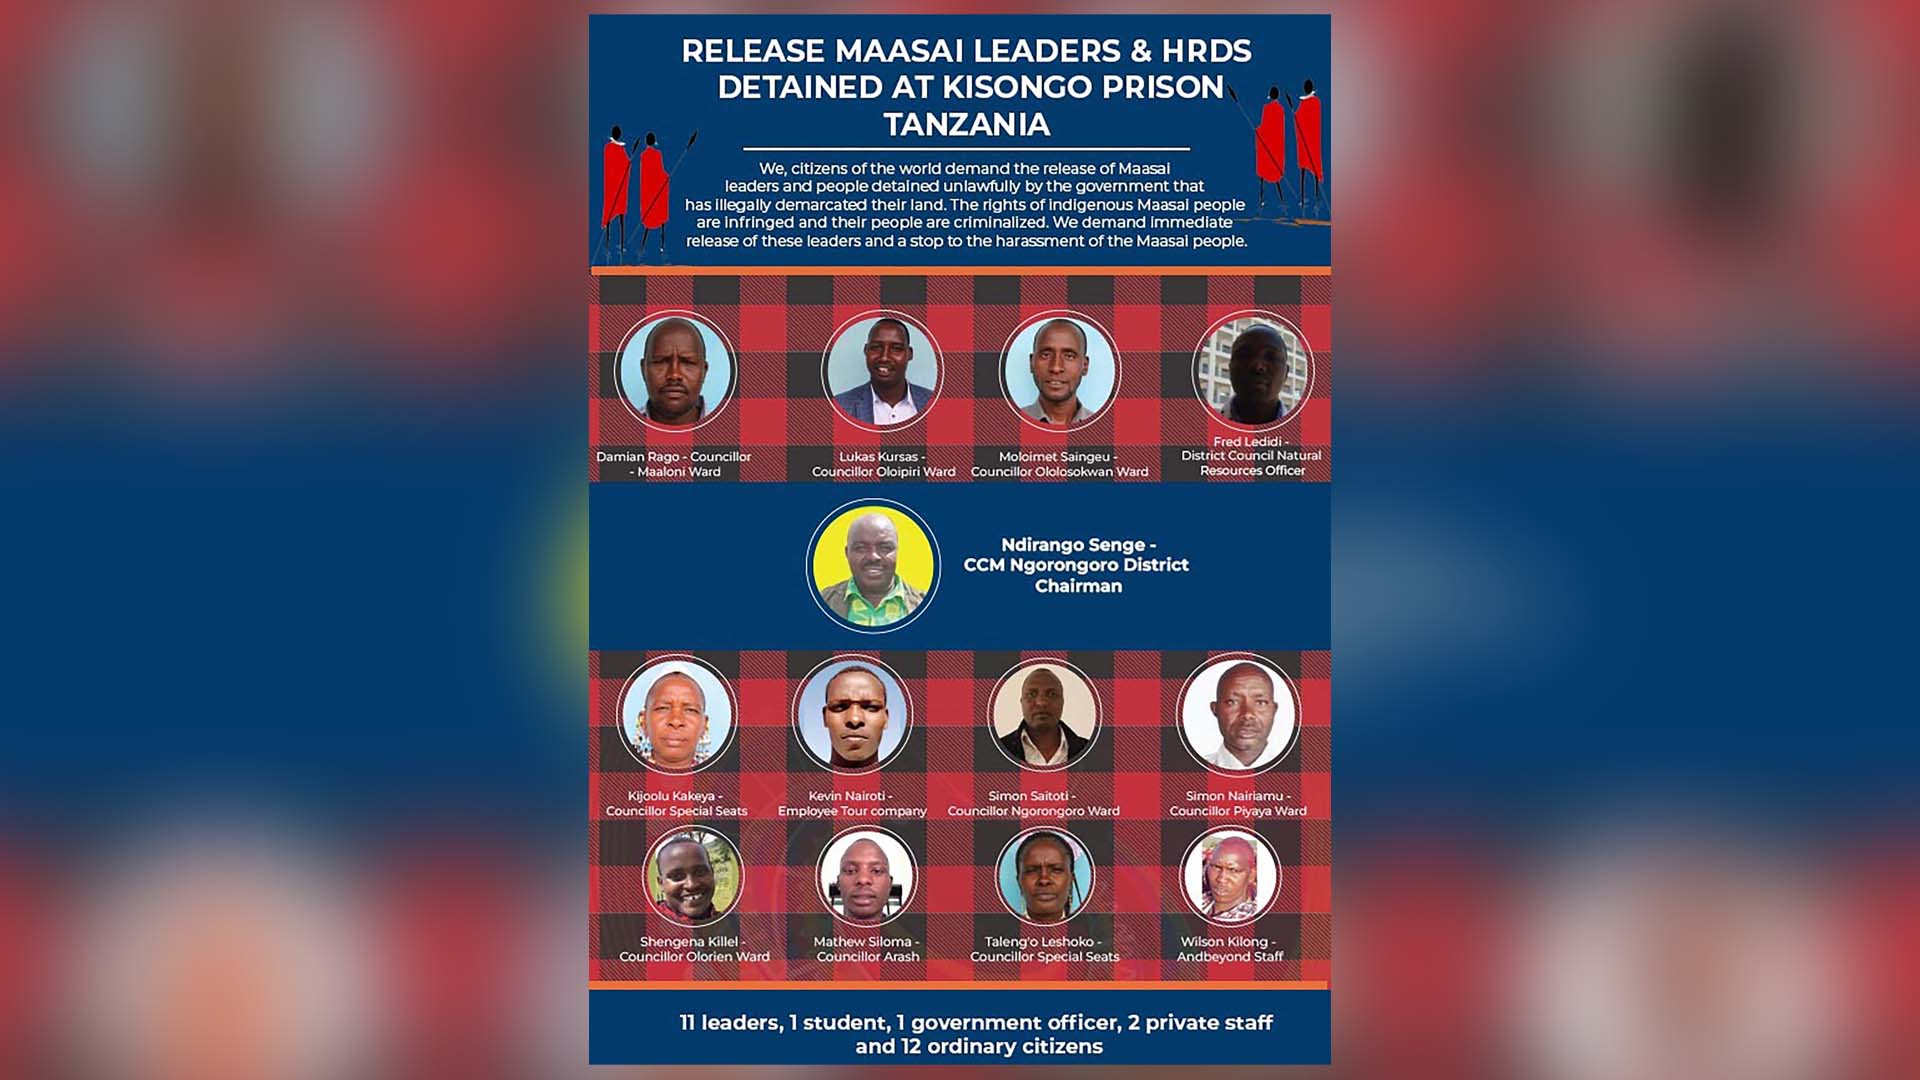 Tanzania Stop further attacks! Free the Maasai leaders and human rights defenders accused under severe trumped-up charges